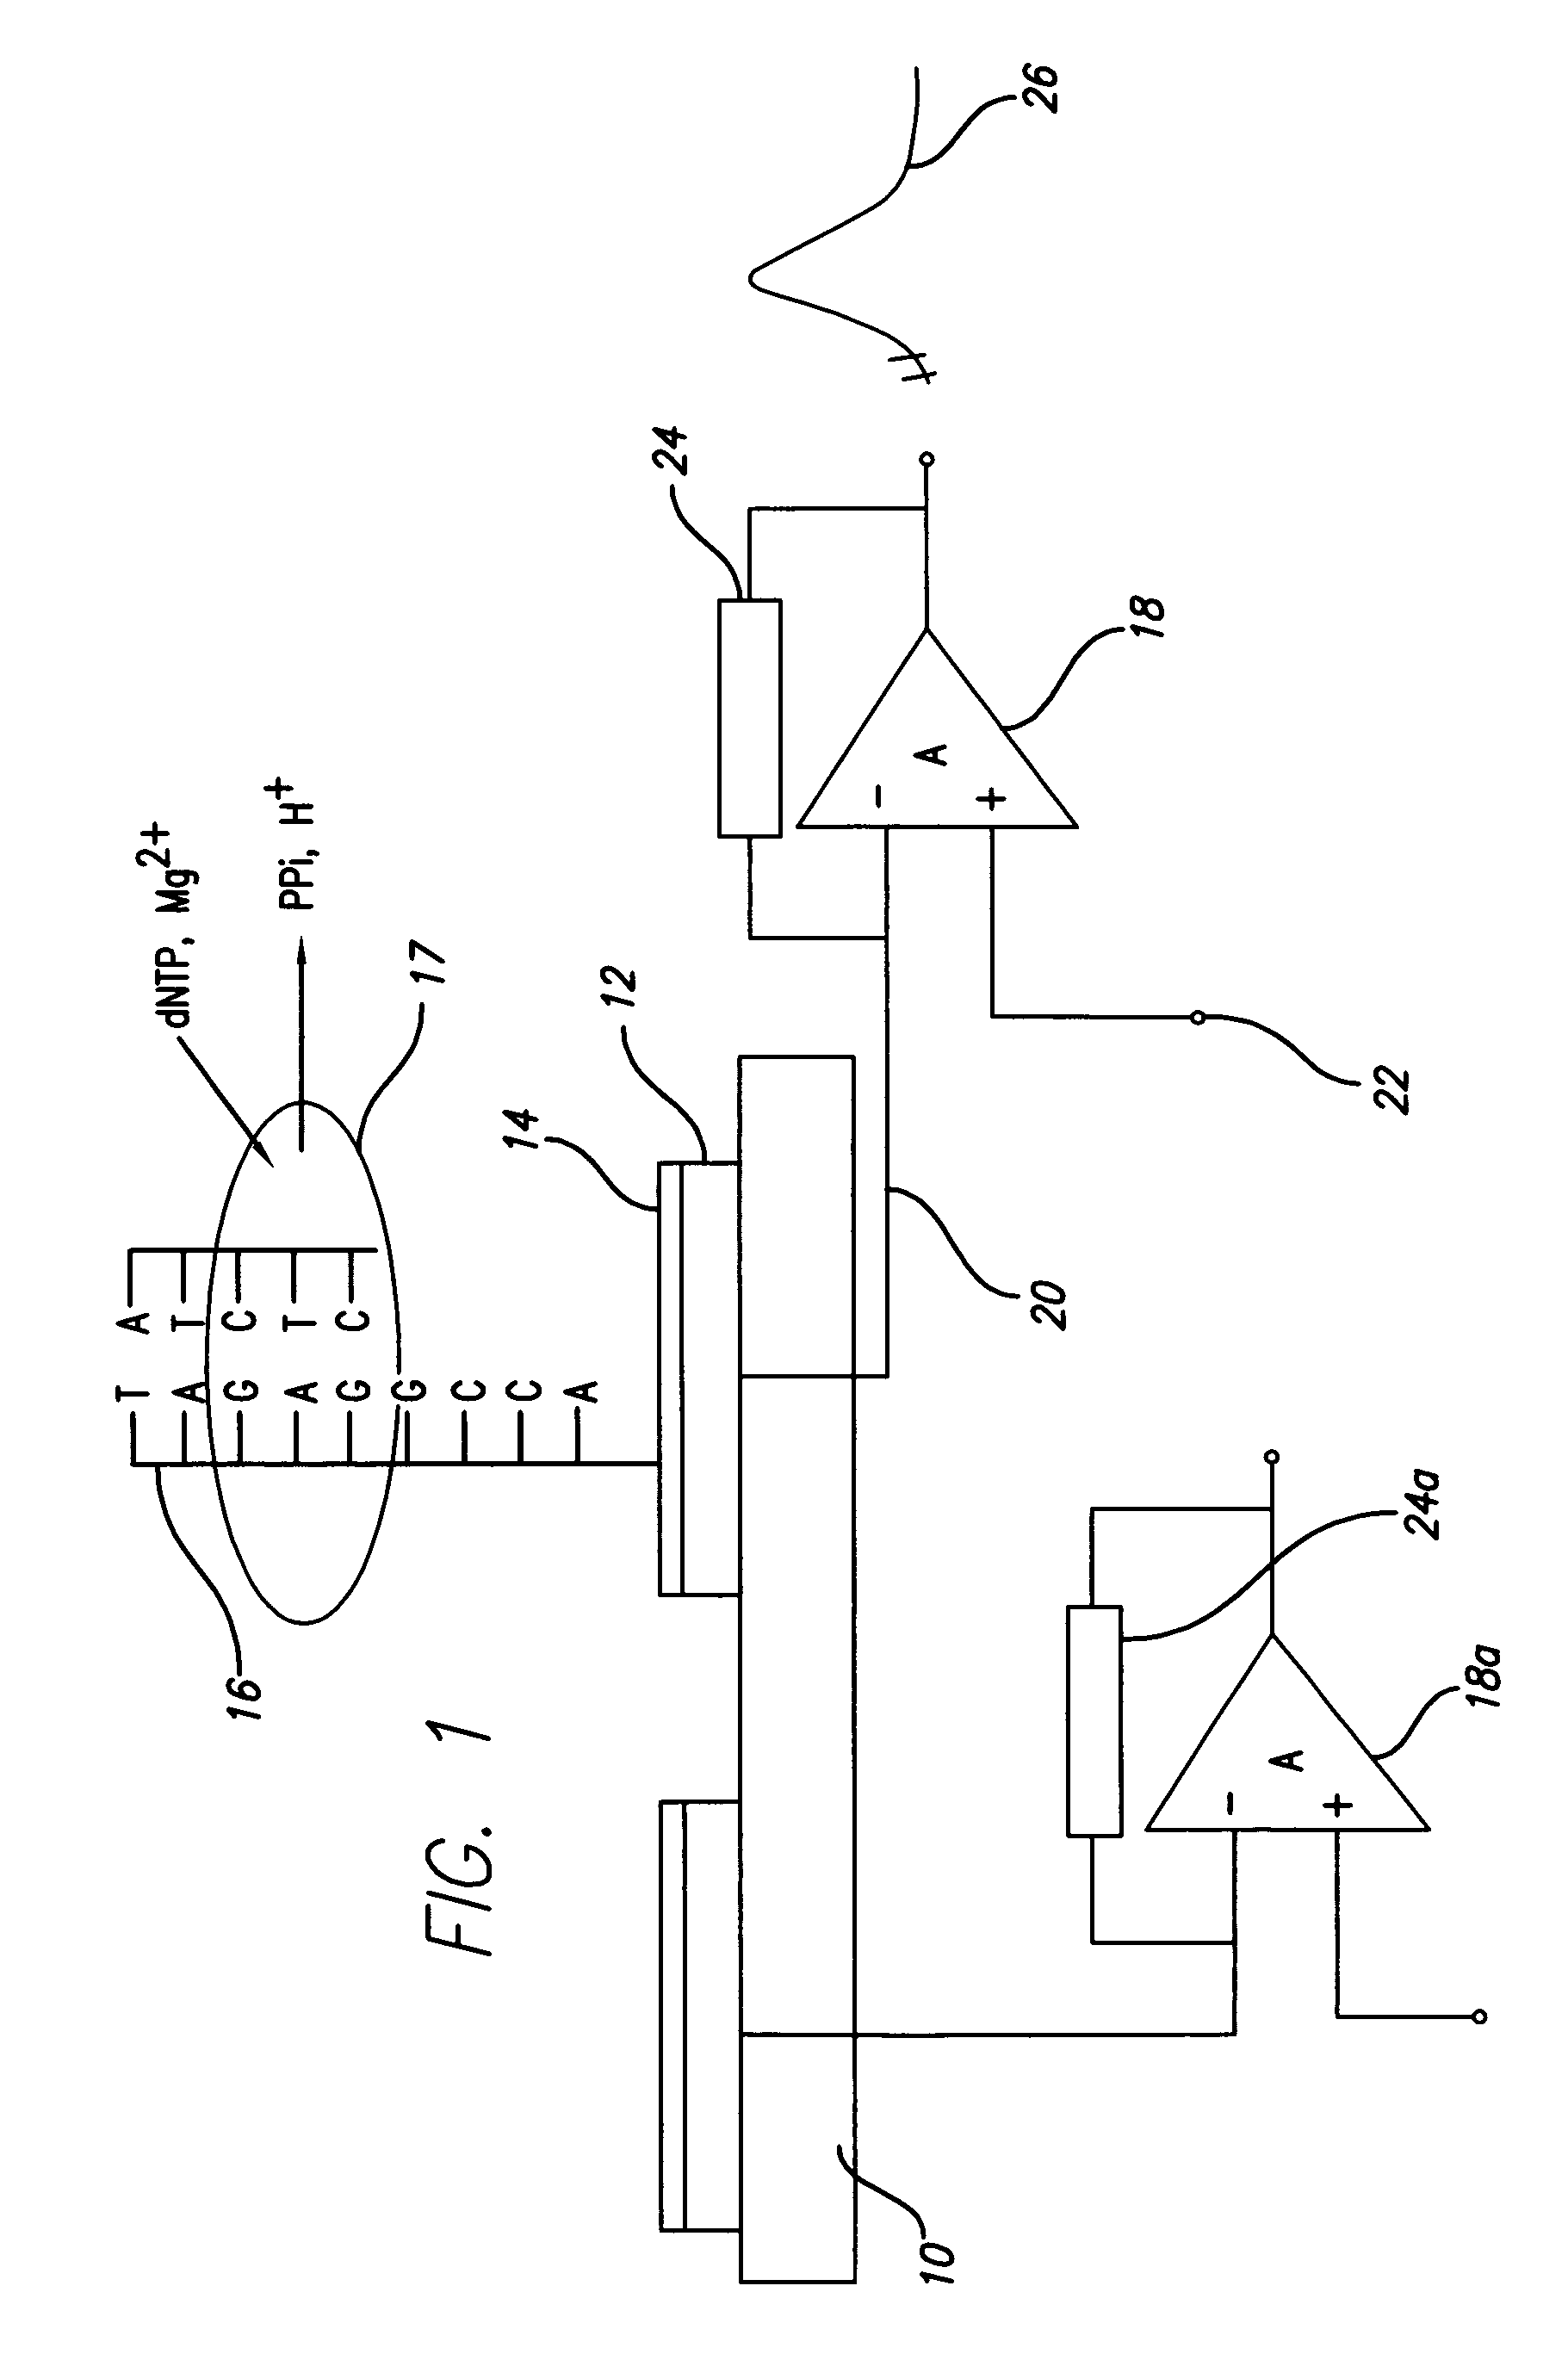 Charge perturbation detection system for DNA and other molecules